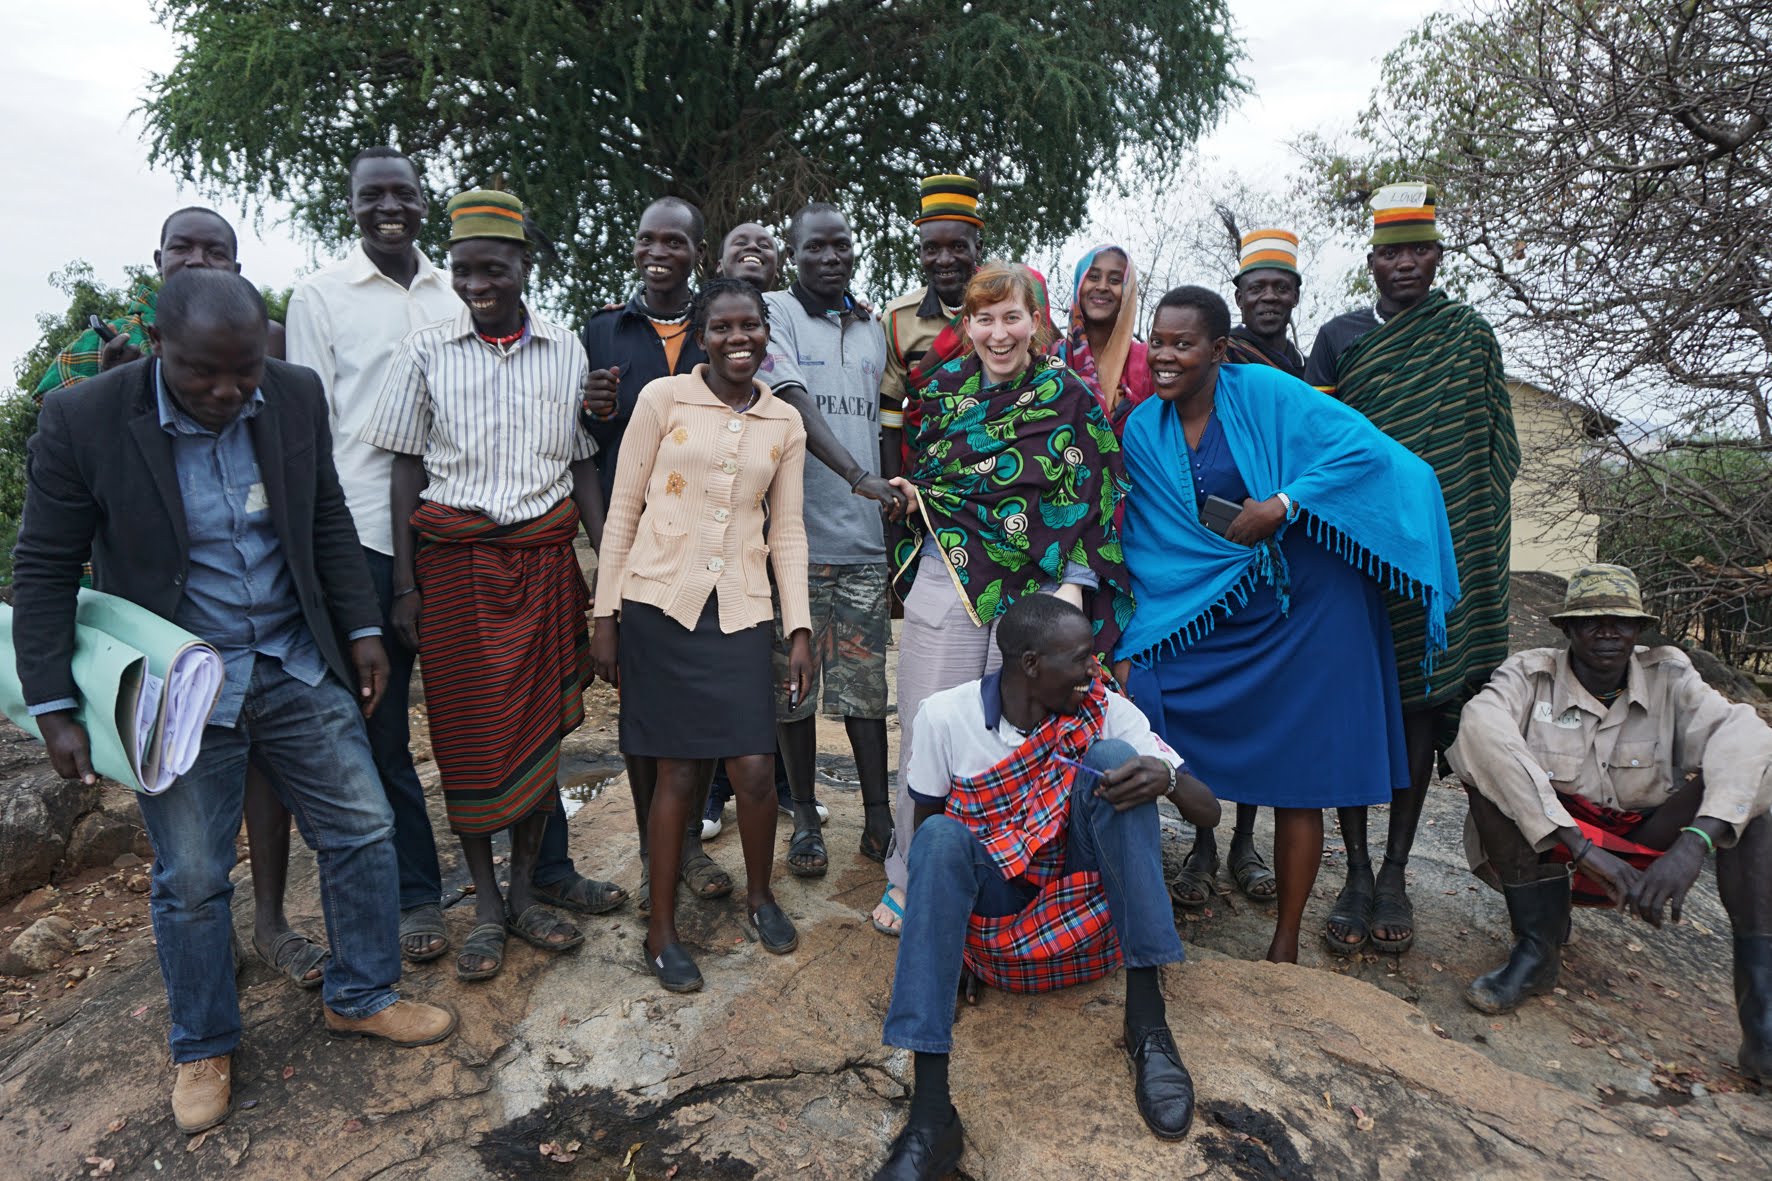 Group photo of members of the tribal group, trainees as well as Sabine, smiling into the camera.